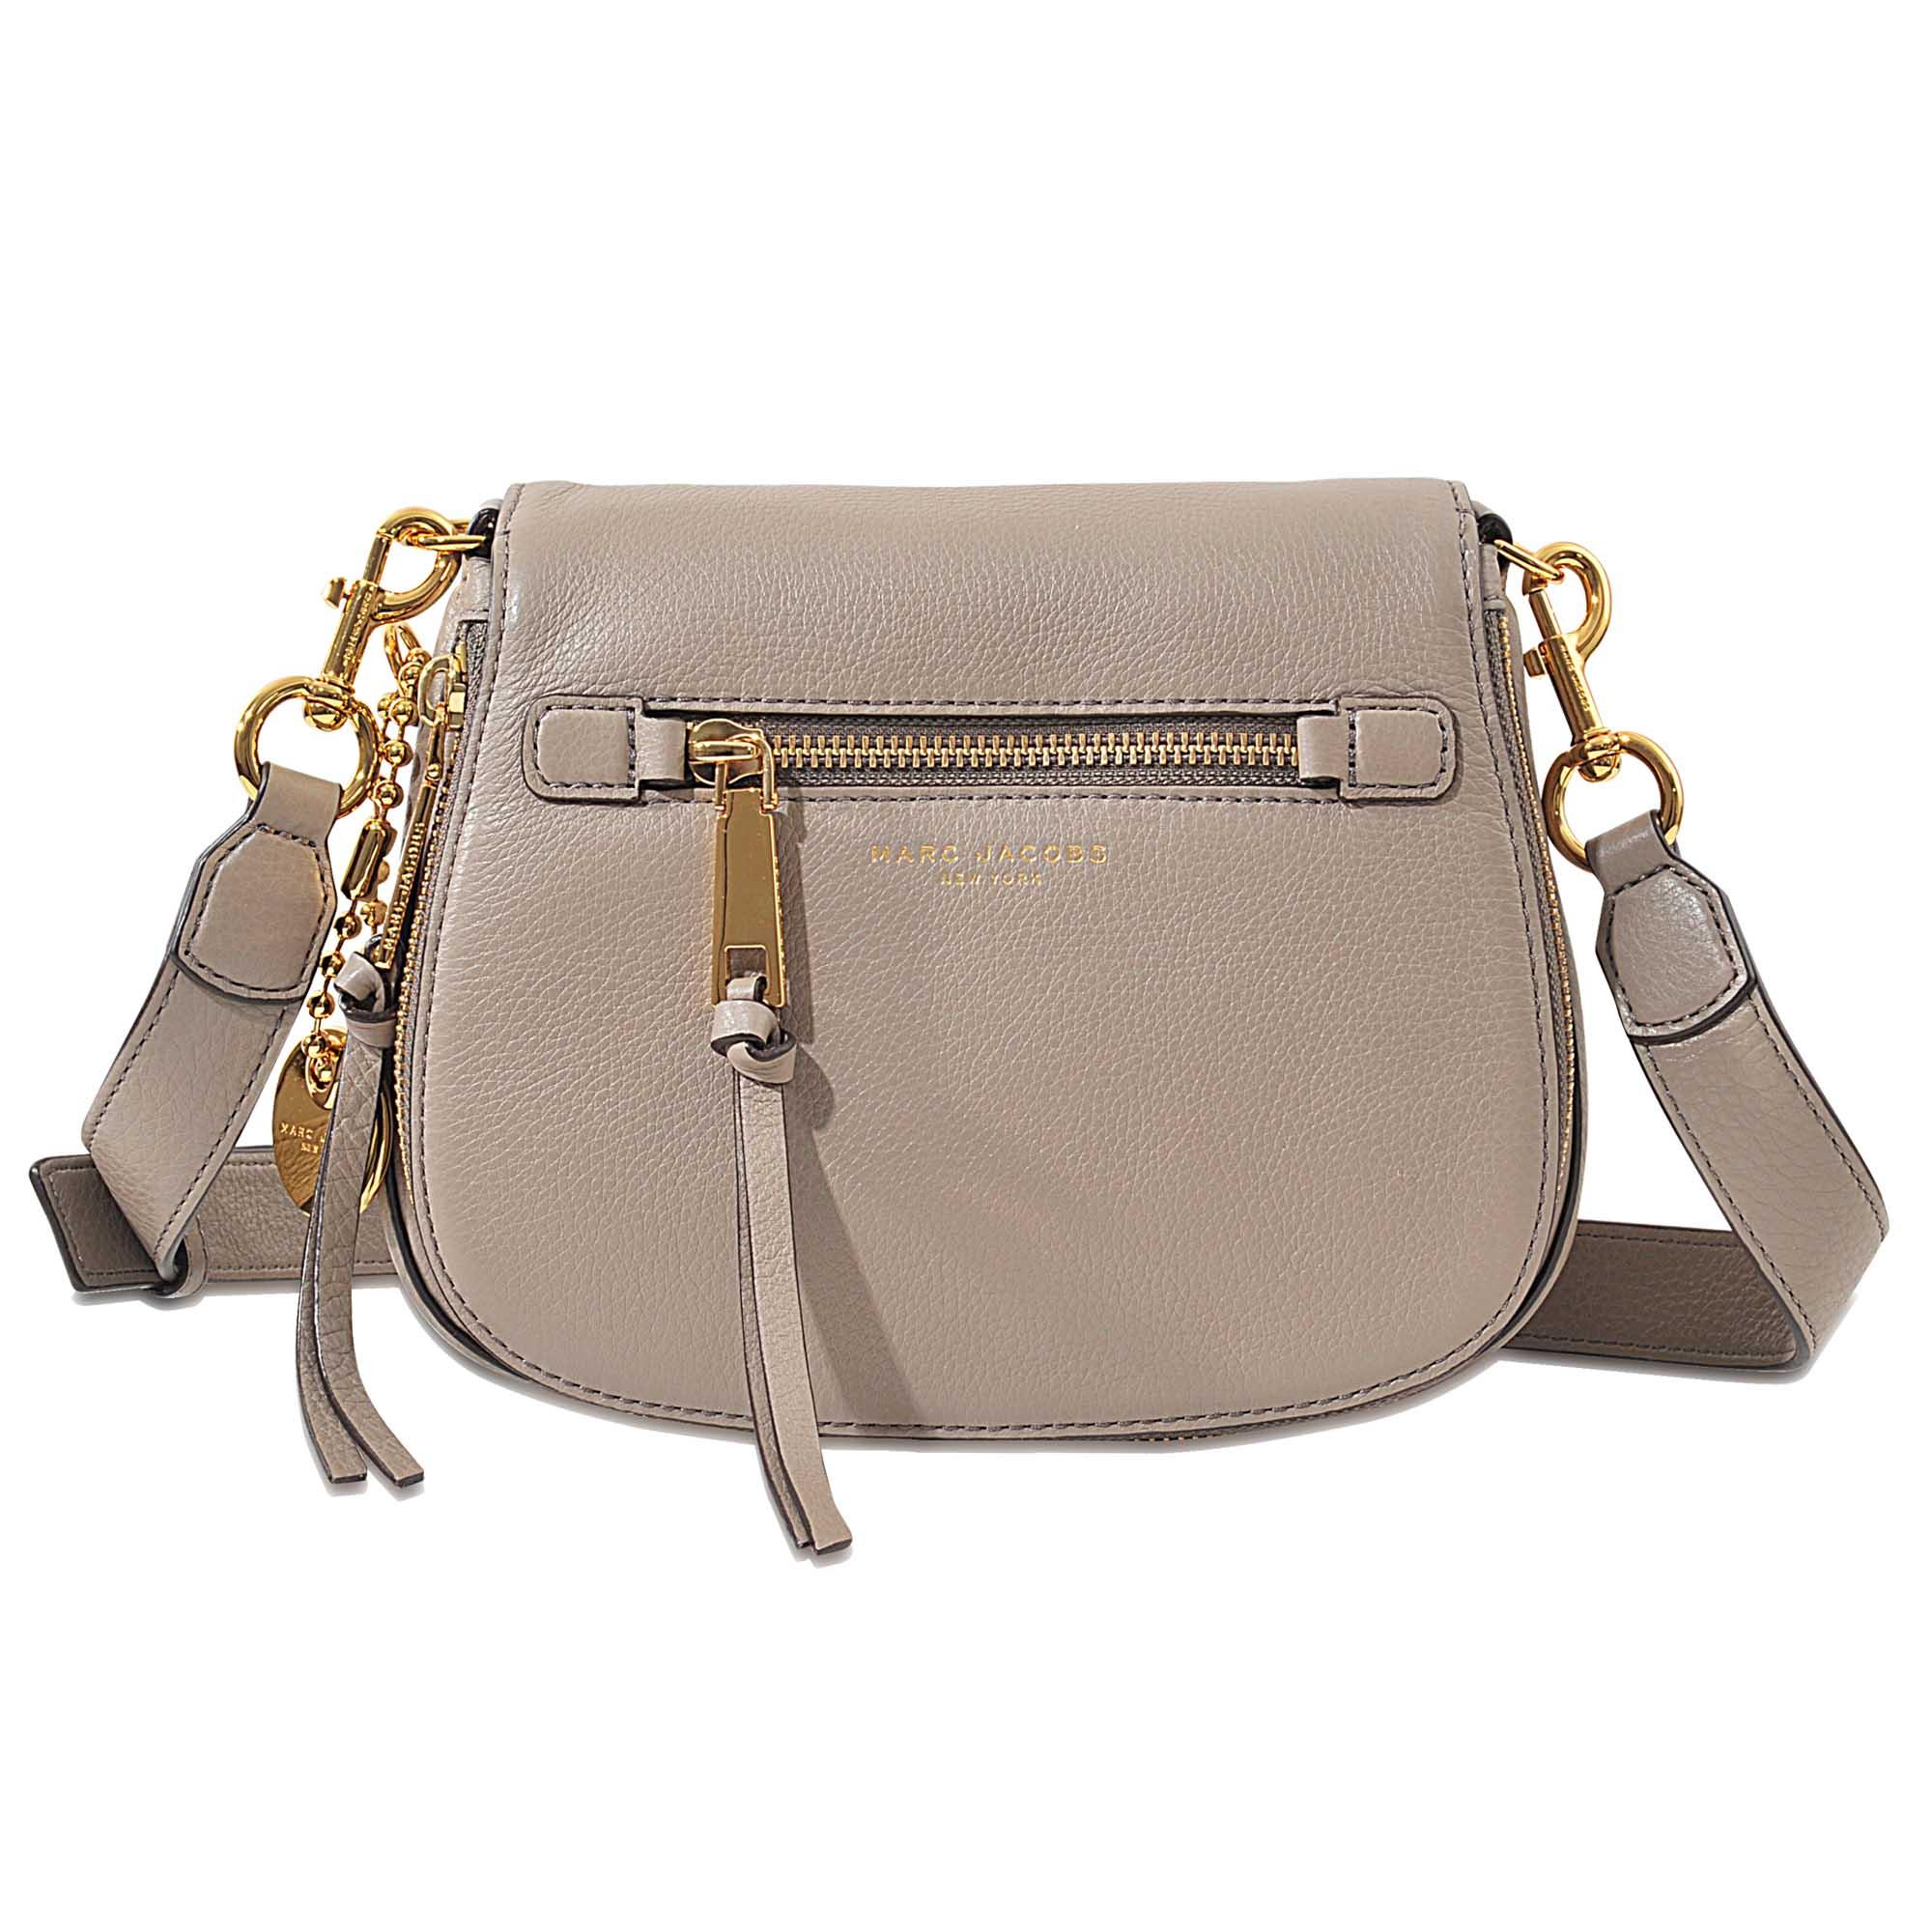 Marc jacobs Recruit Small Saddle Bag in Multicolor | Lyst